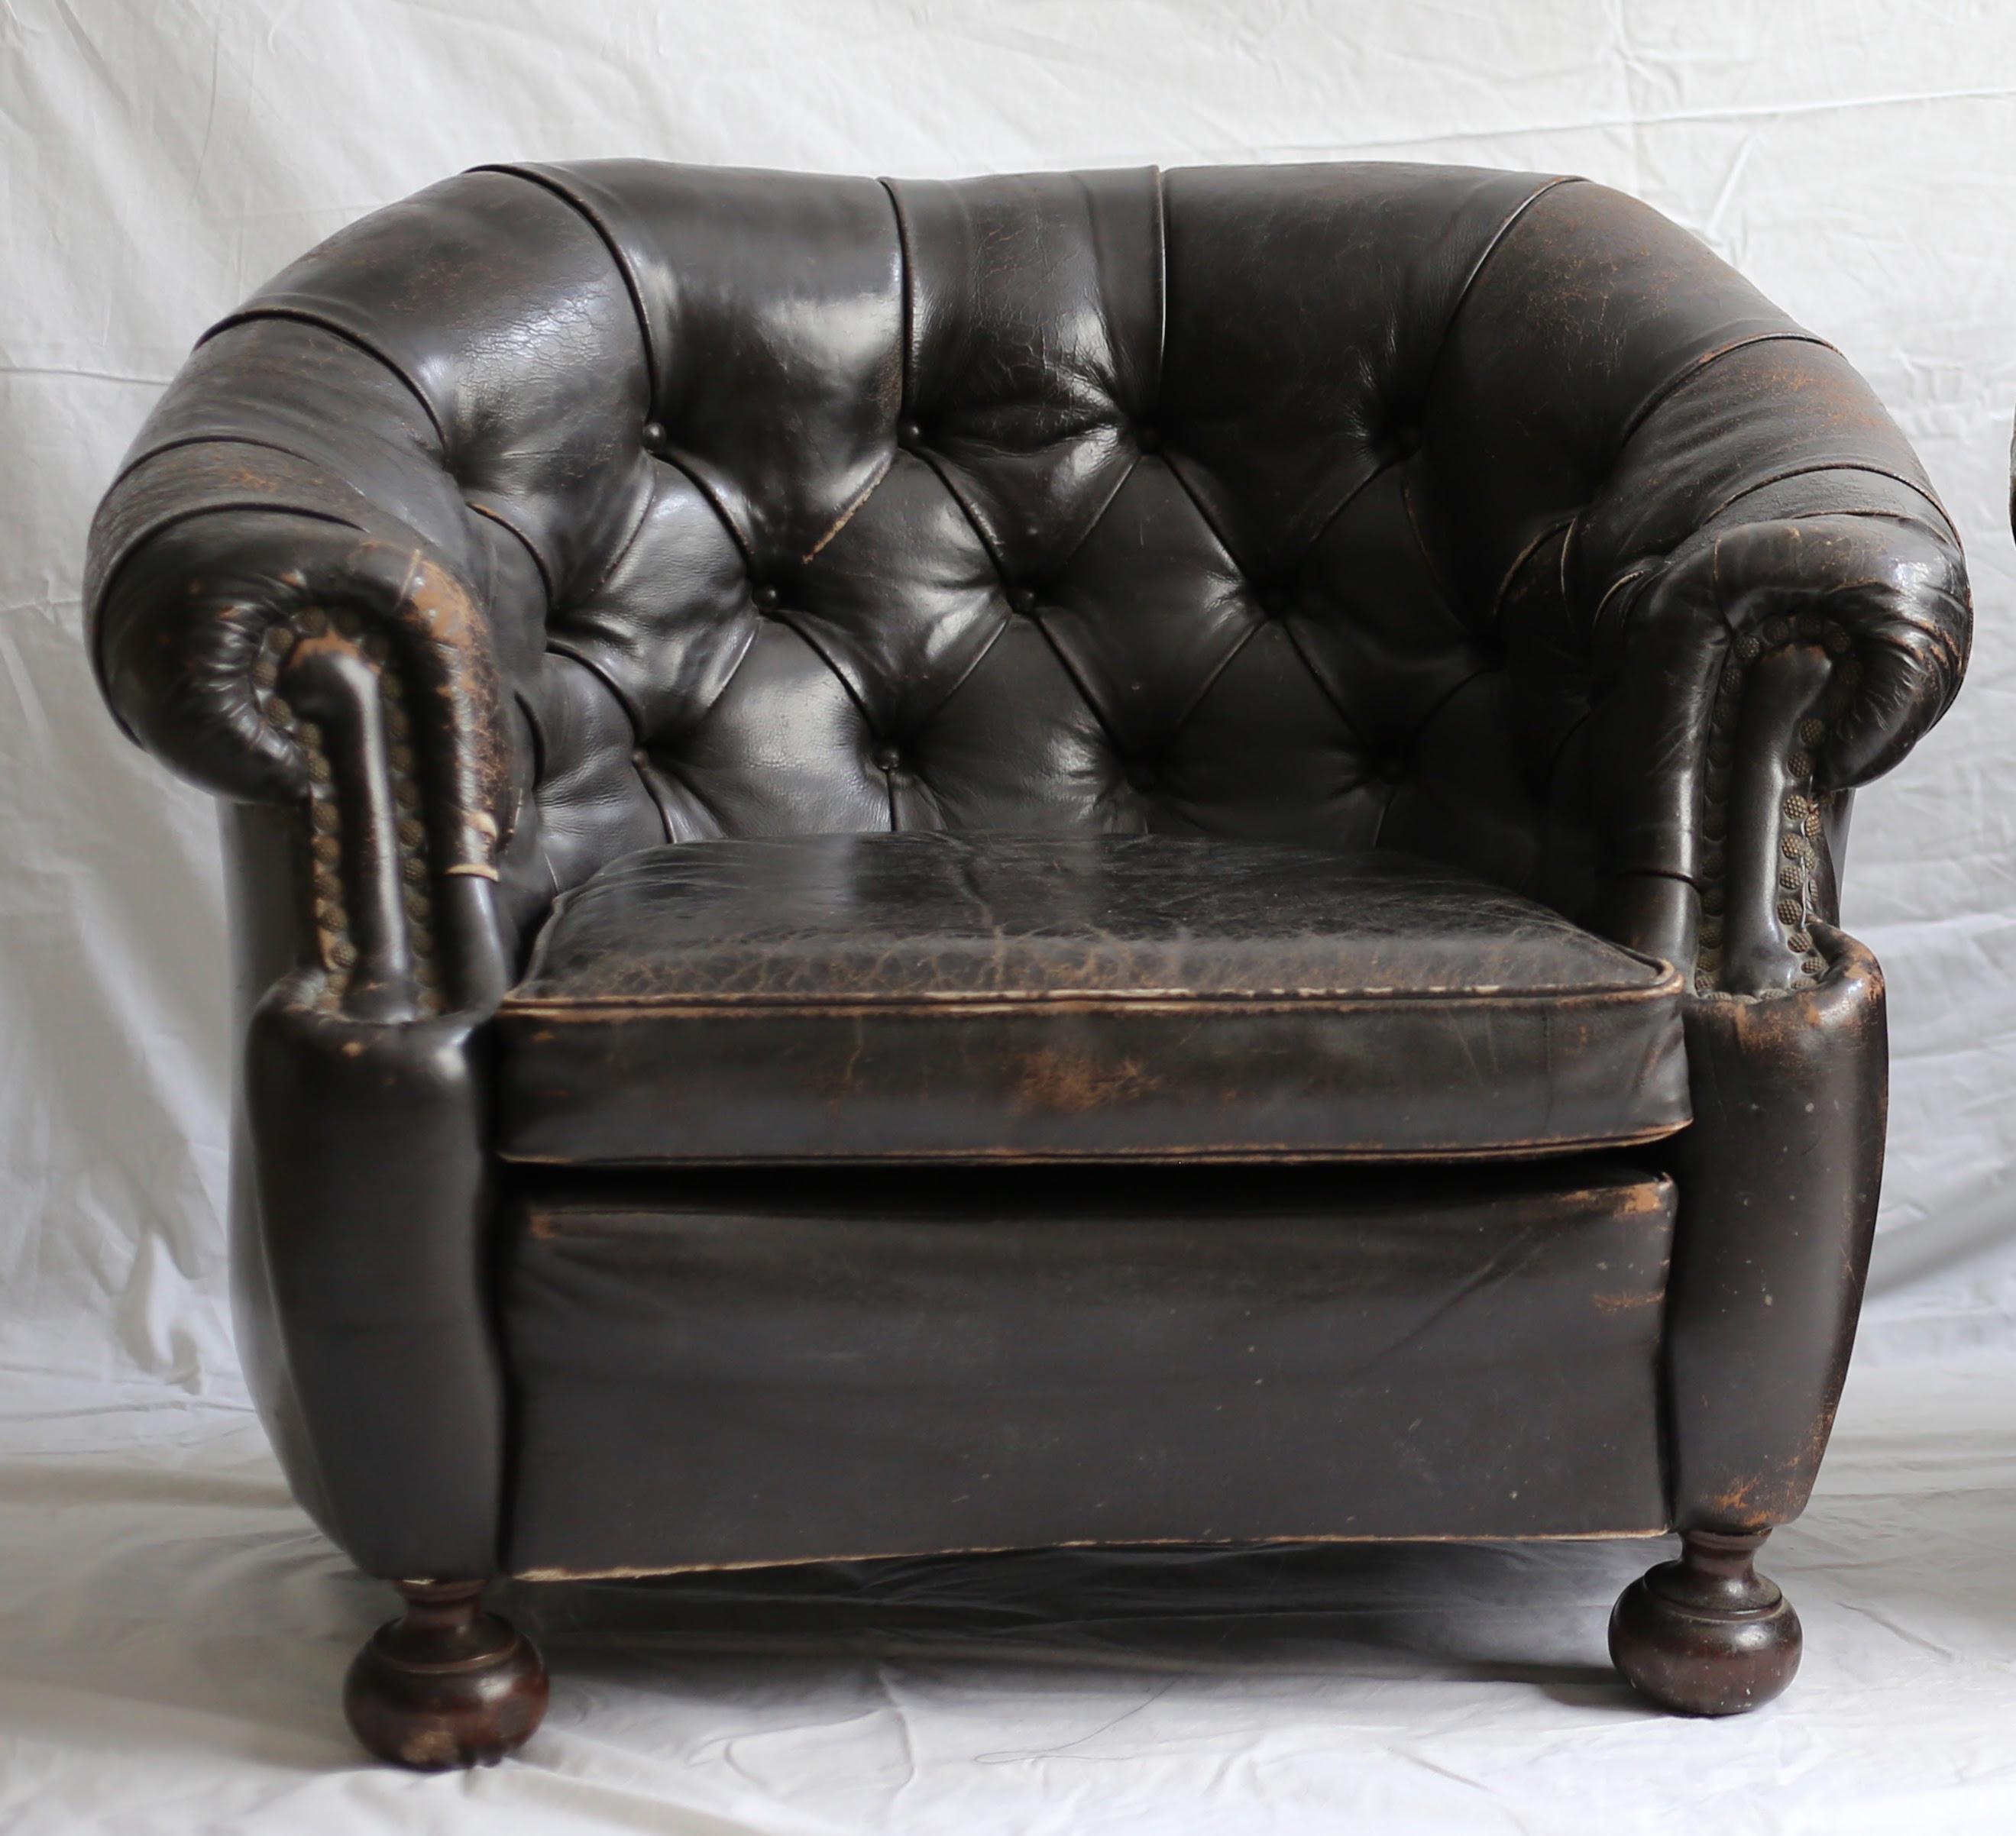 A fantastic pair of vintage Chesterfield button-tufted leather club chairs with lots of character from authentic patina and wear. Upholstered in very dark brown leather with nailhead detailing at the arms and turned wood bun feet.
